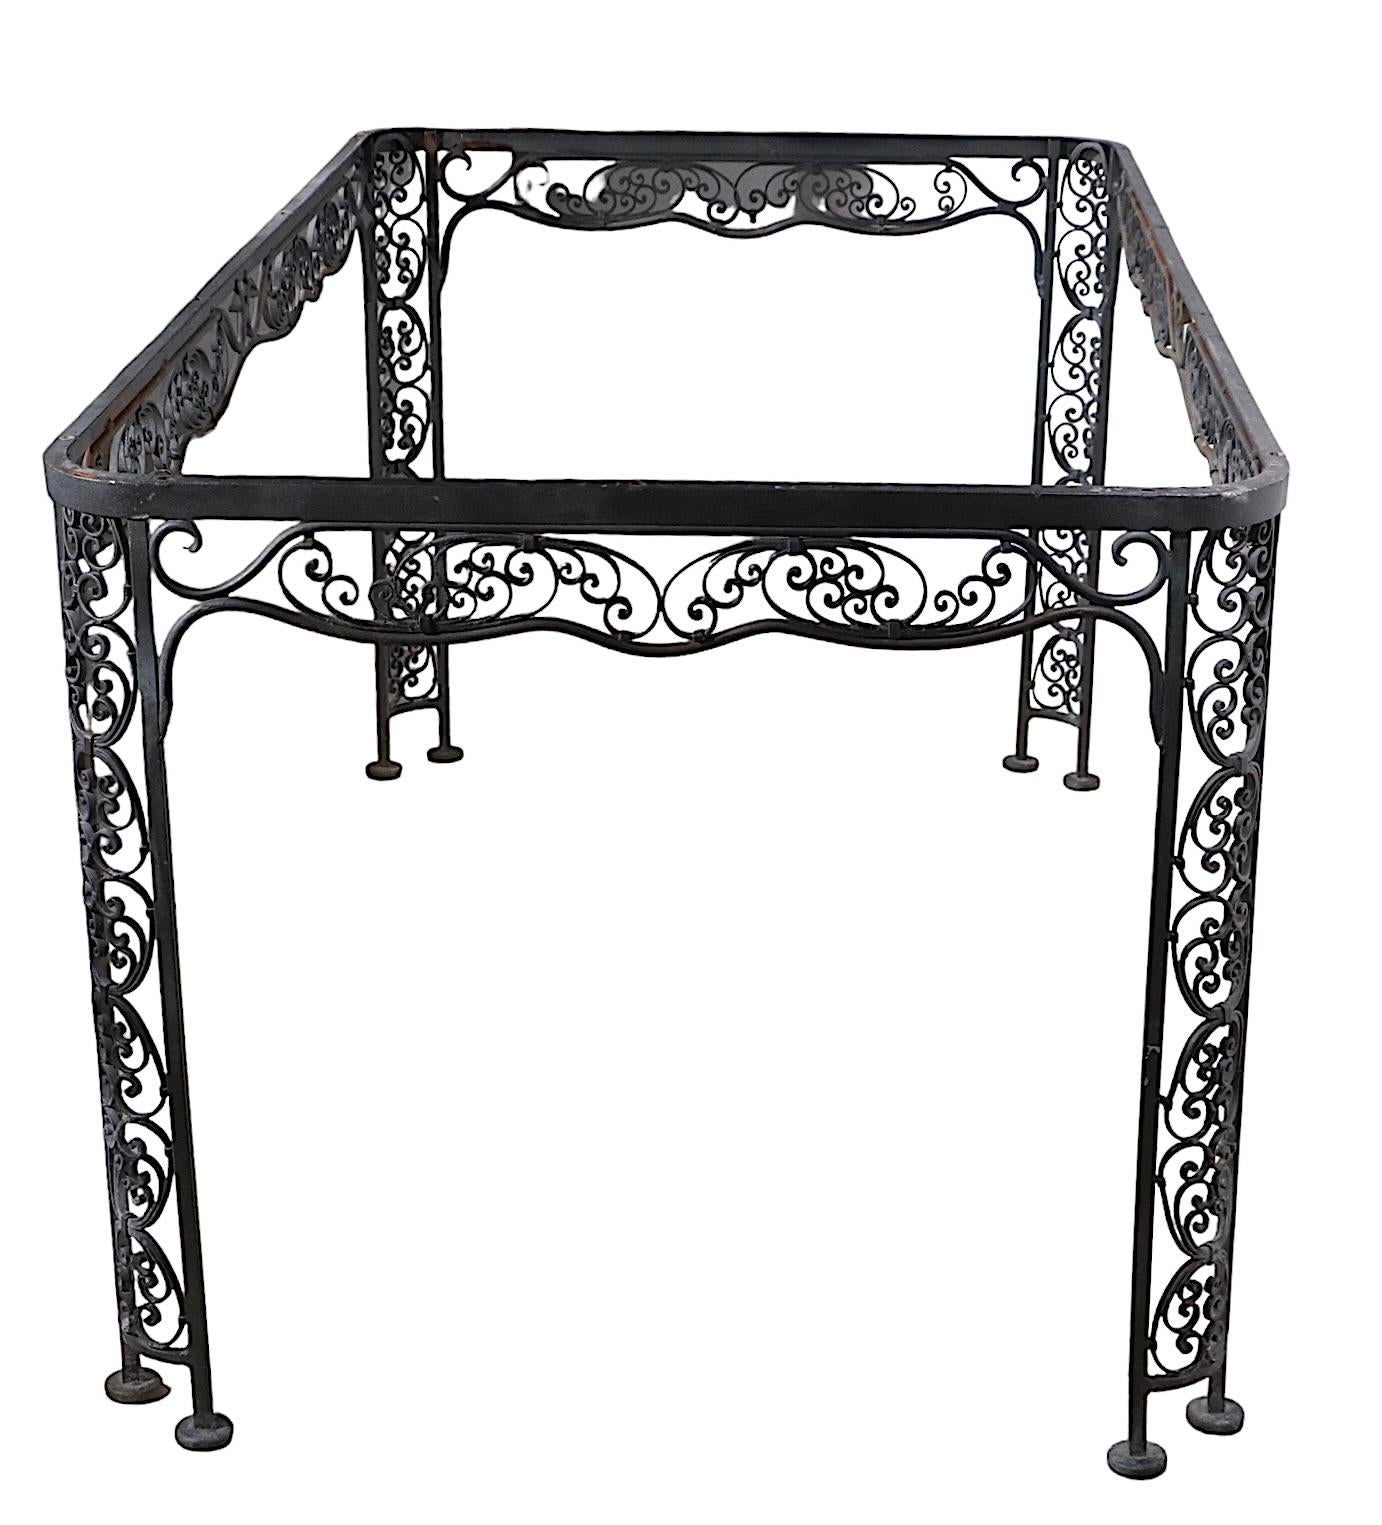 American Ornate Wrought Iron Garden Patio Poolside Dining Table by Lee Woodard, c 1940's For Sale